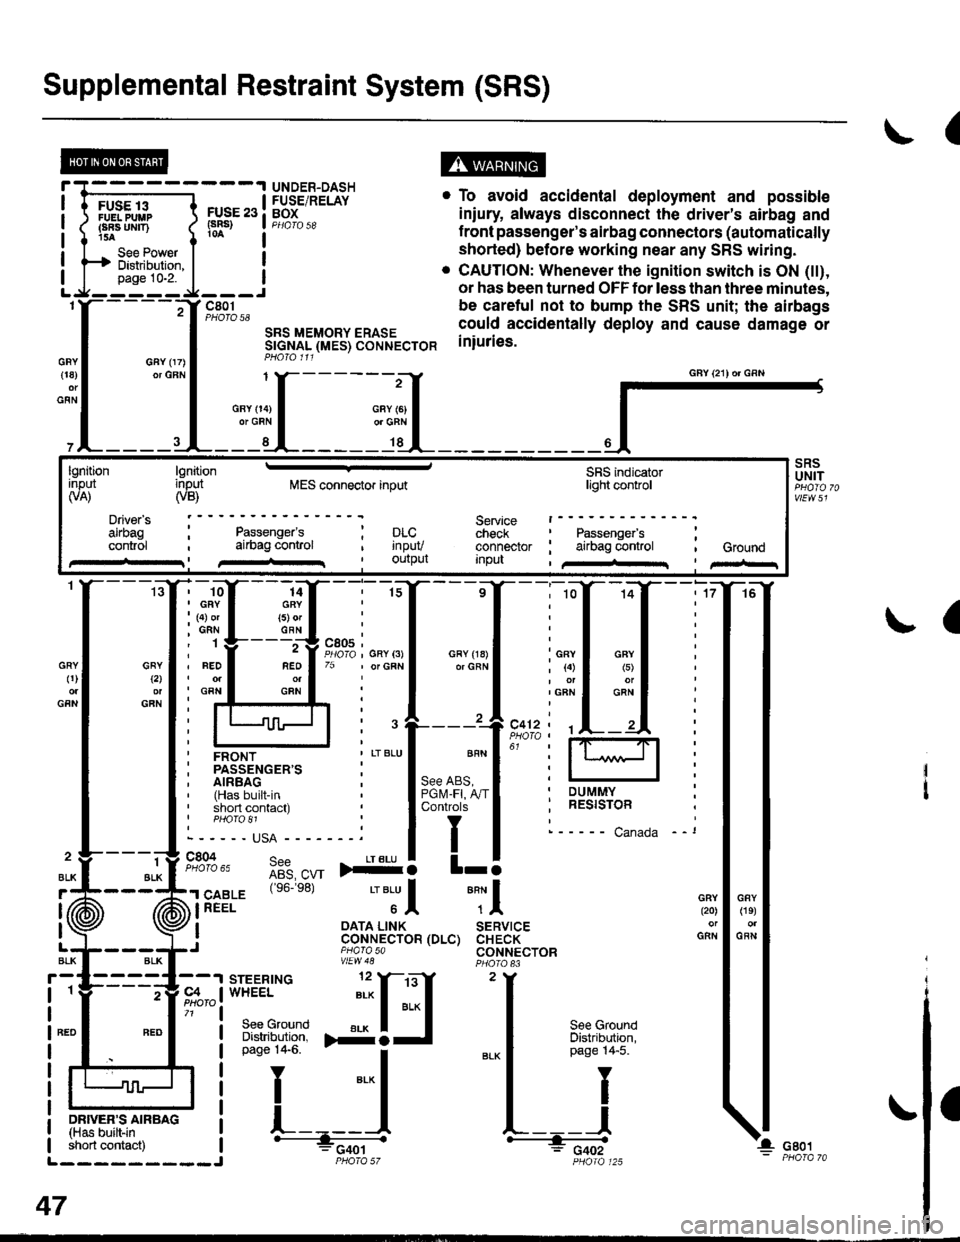 HONDA CIVIC 1996 6.G Manual PDF Supplemental Restraint System (SRS)
(
FUSE 13FUELPUUPFBA UMT)15A
See PowerDistibution,page 10-2.
FUSE 23(sRs)
c801PHOTO 58
SRS MEMORY ERASESTGNAL (MES) CONNECTORPHO|O 111
. To avoid accidental deploym